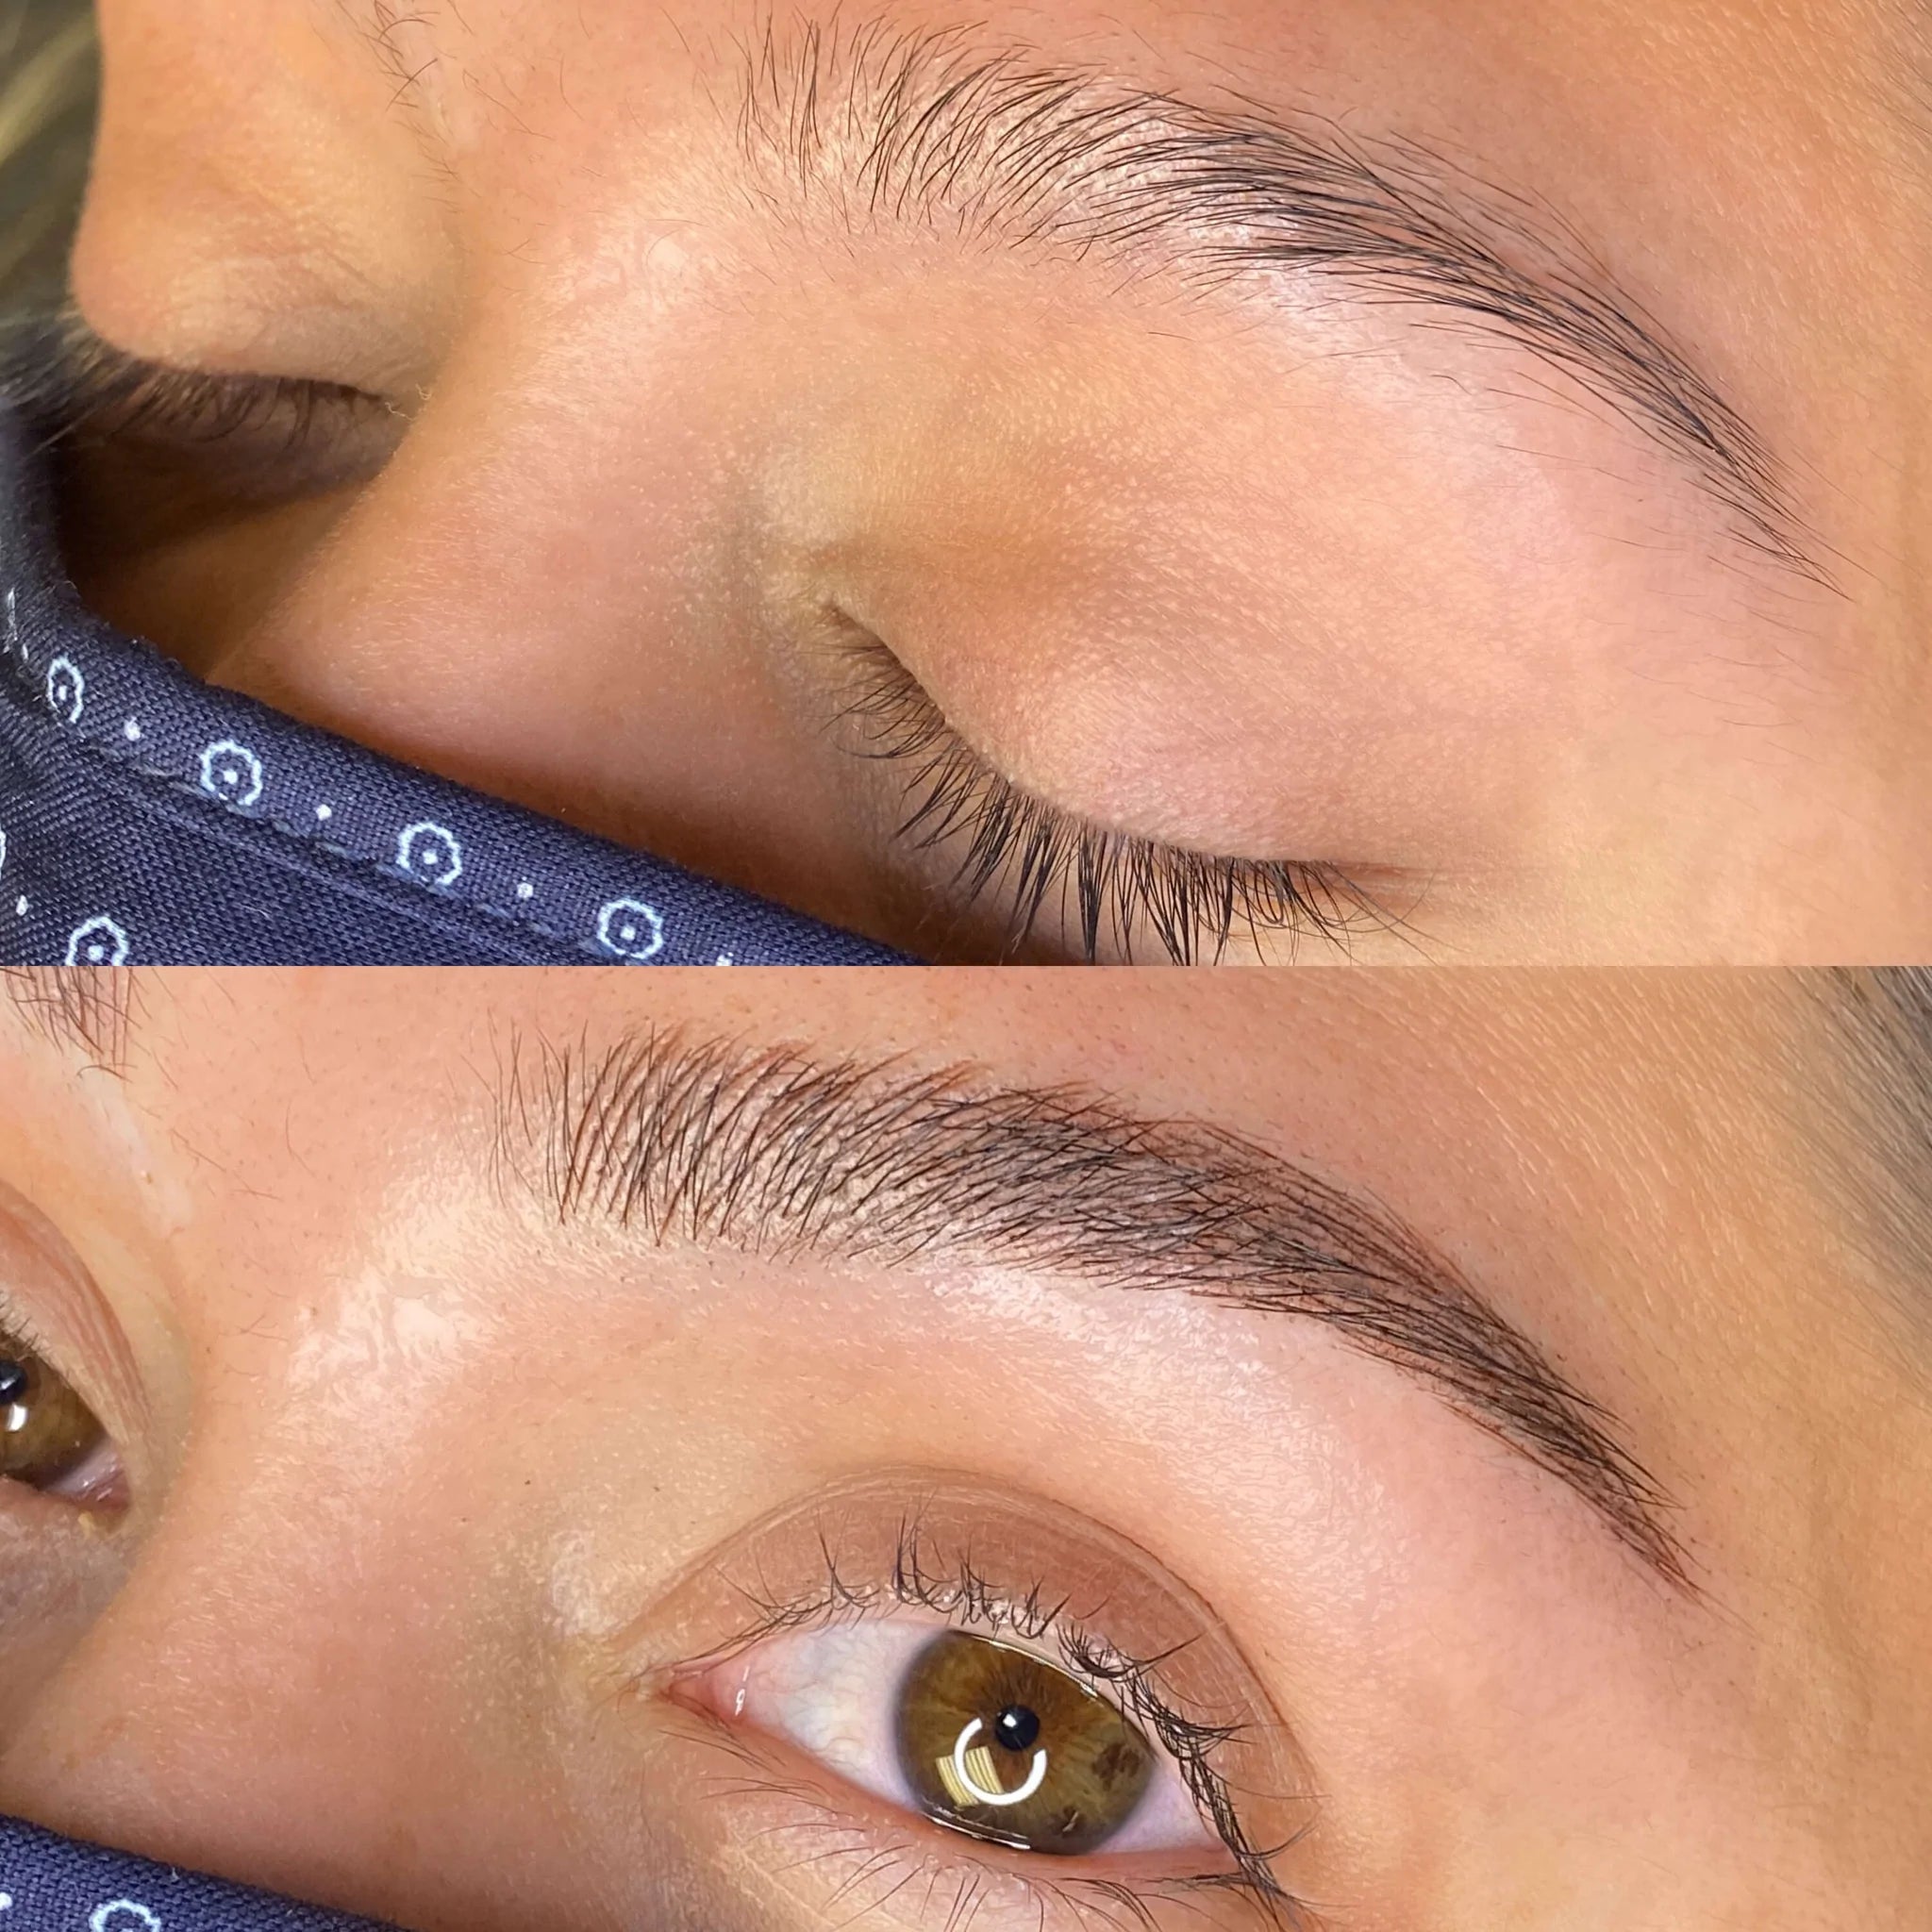 PERMA BLEND BROW PIGMENT - ESPRESSO HEALED RESULTS